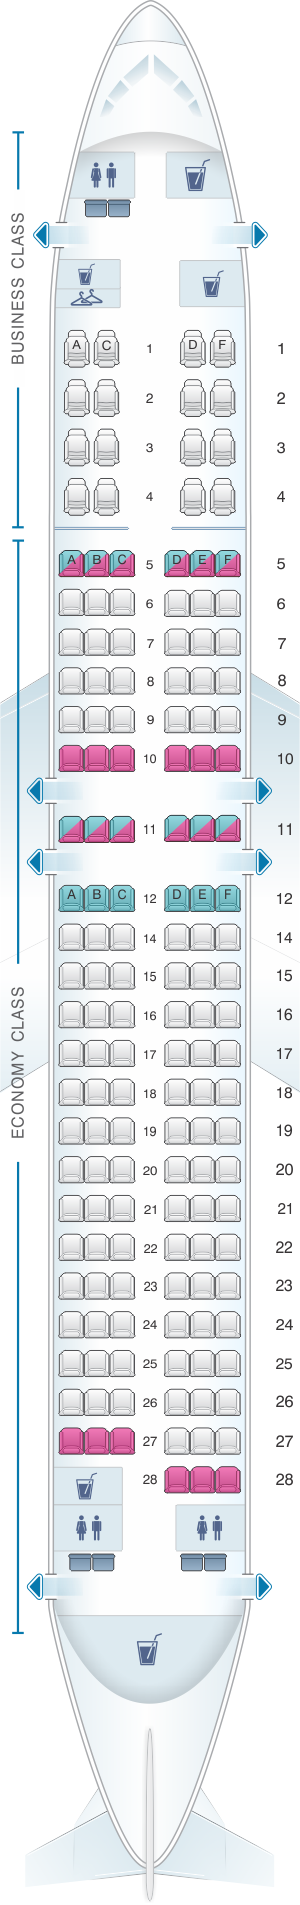 Seat map for Turkish Airlines Boeing B737 900ER